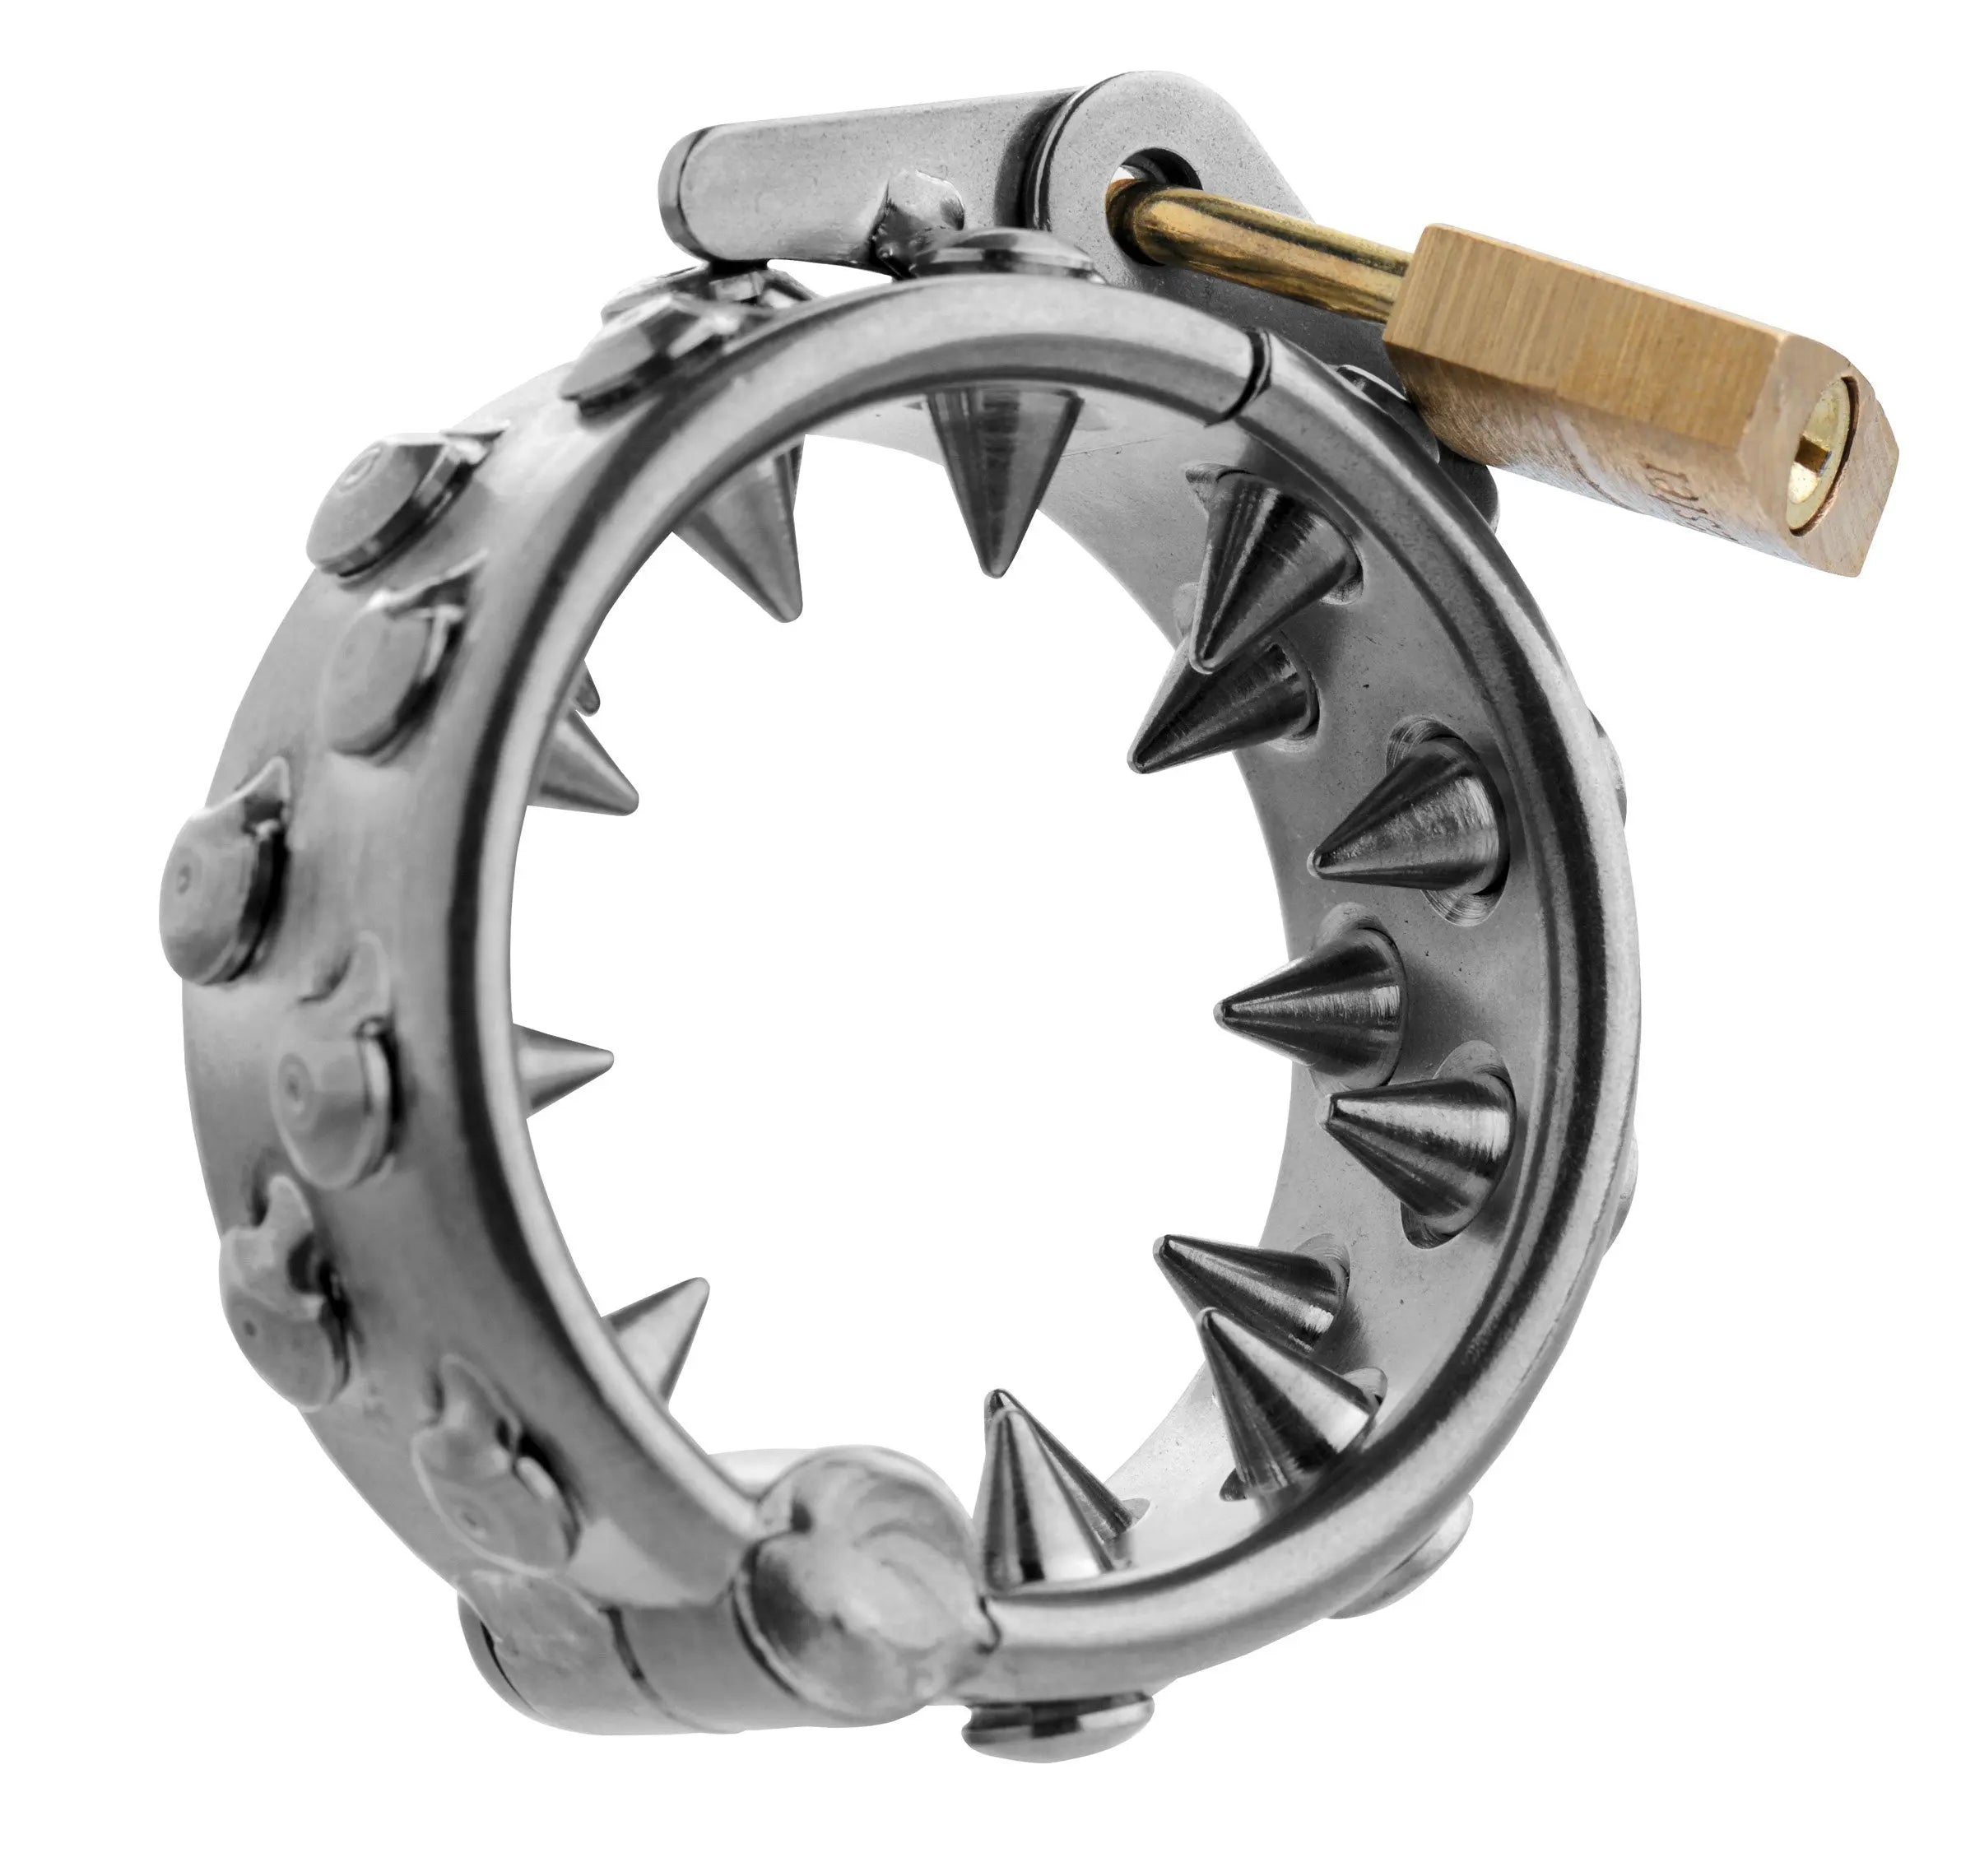 Impaler Locking Cbt Ring With Spikes XR Brands Master Series